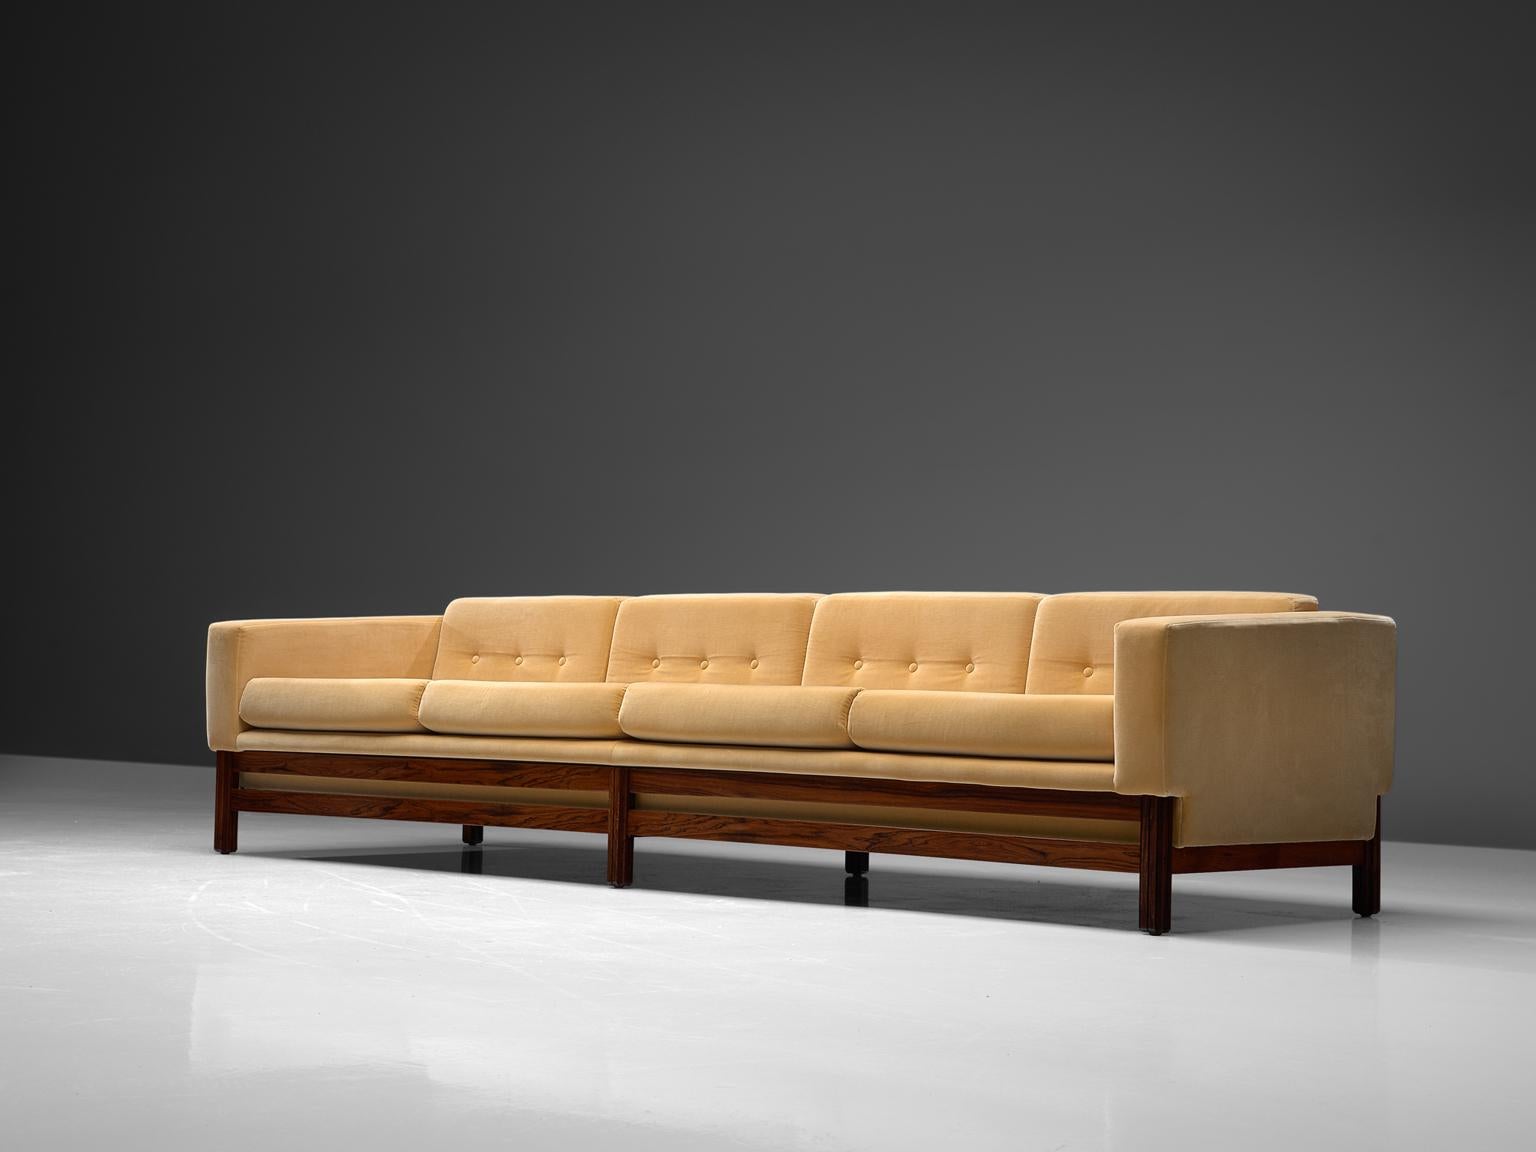 Sofa, in rosewood and fabric by Saporiti, Italy 1960s.

This sofa, equipped with a solid rosewood frame is reupholstered in high quality yellow velours like fabric. Done by our own team of specialists of the in-house atelier. The sofa is designed in